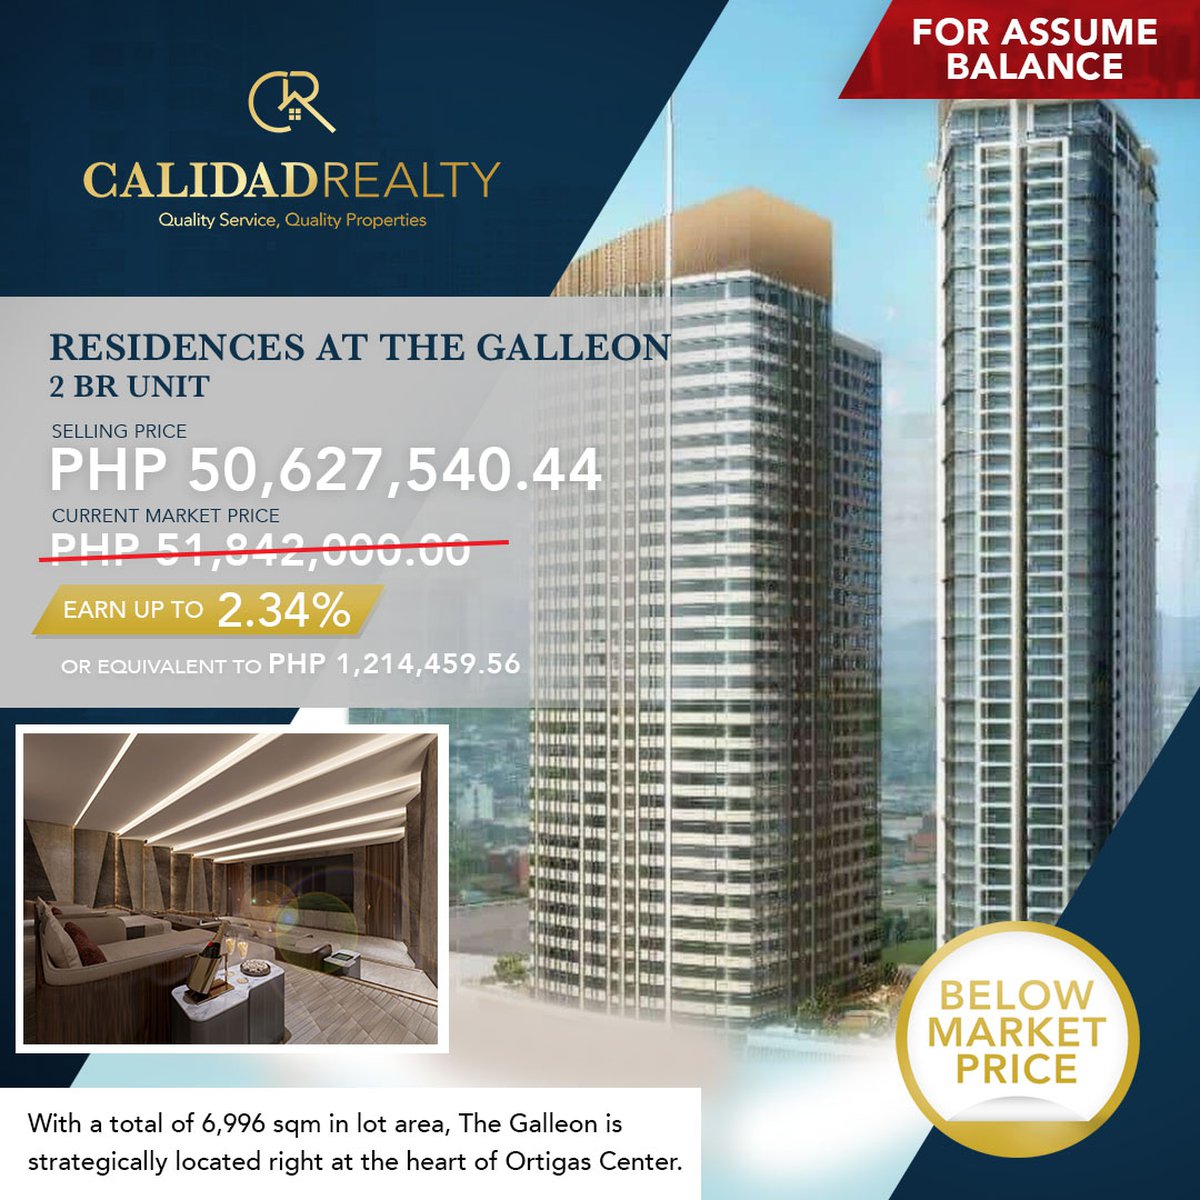 2BR Unit at Galleon Residences